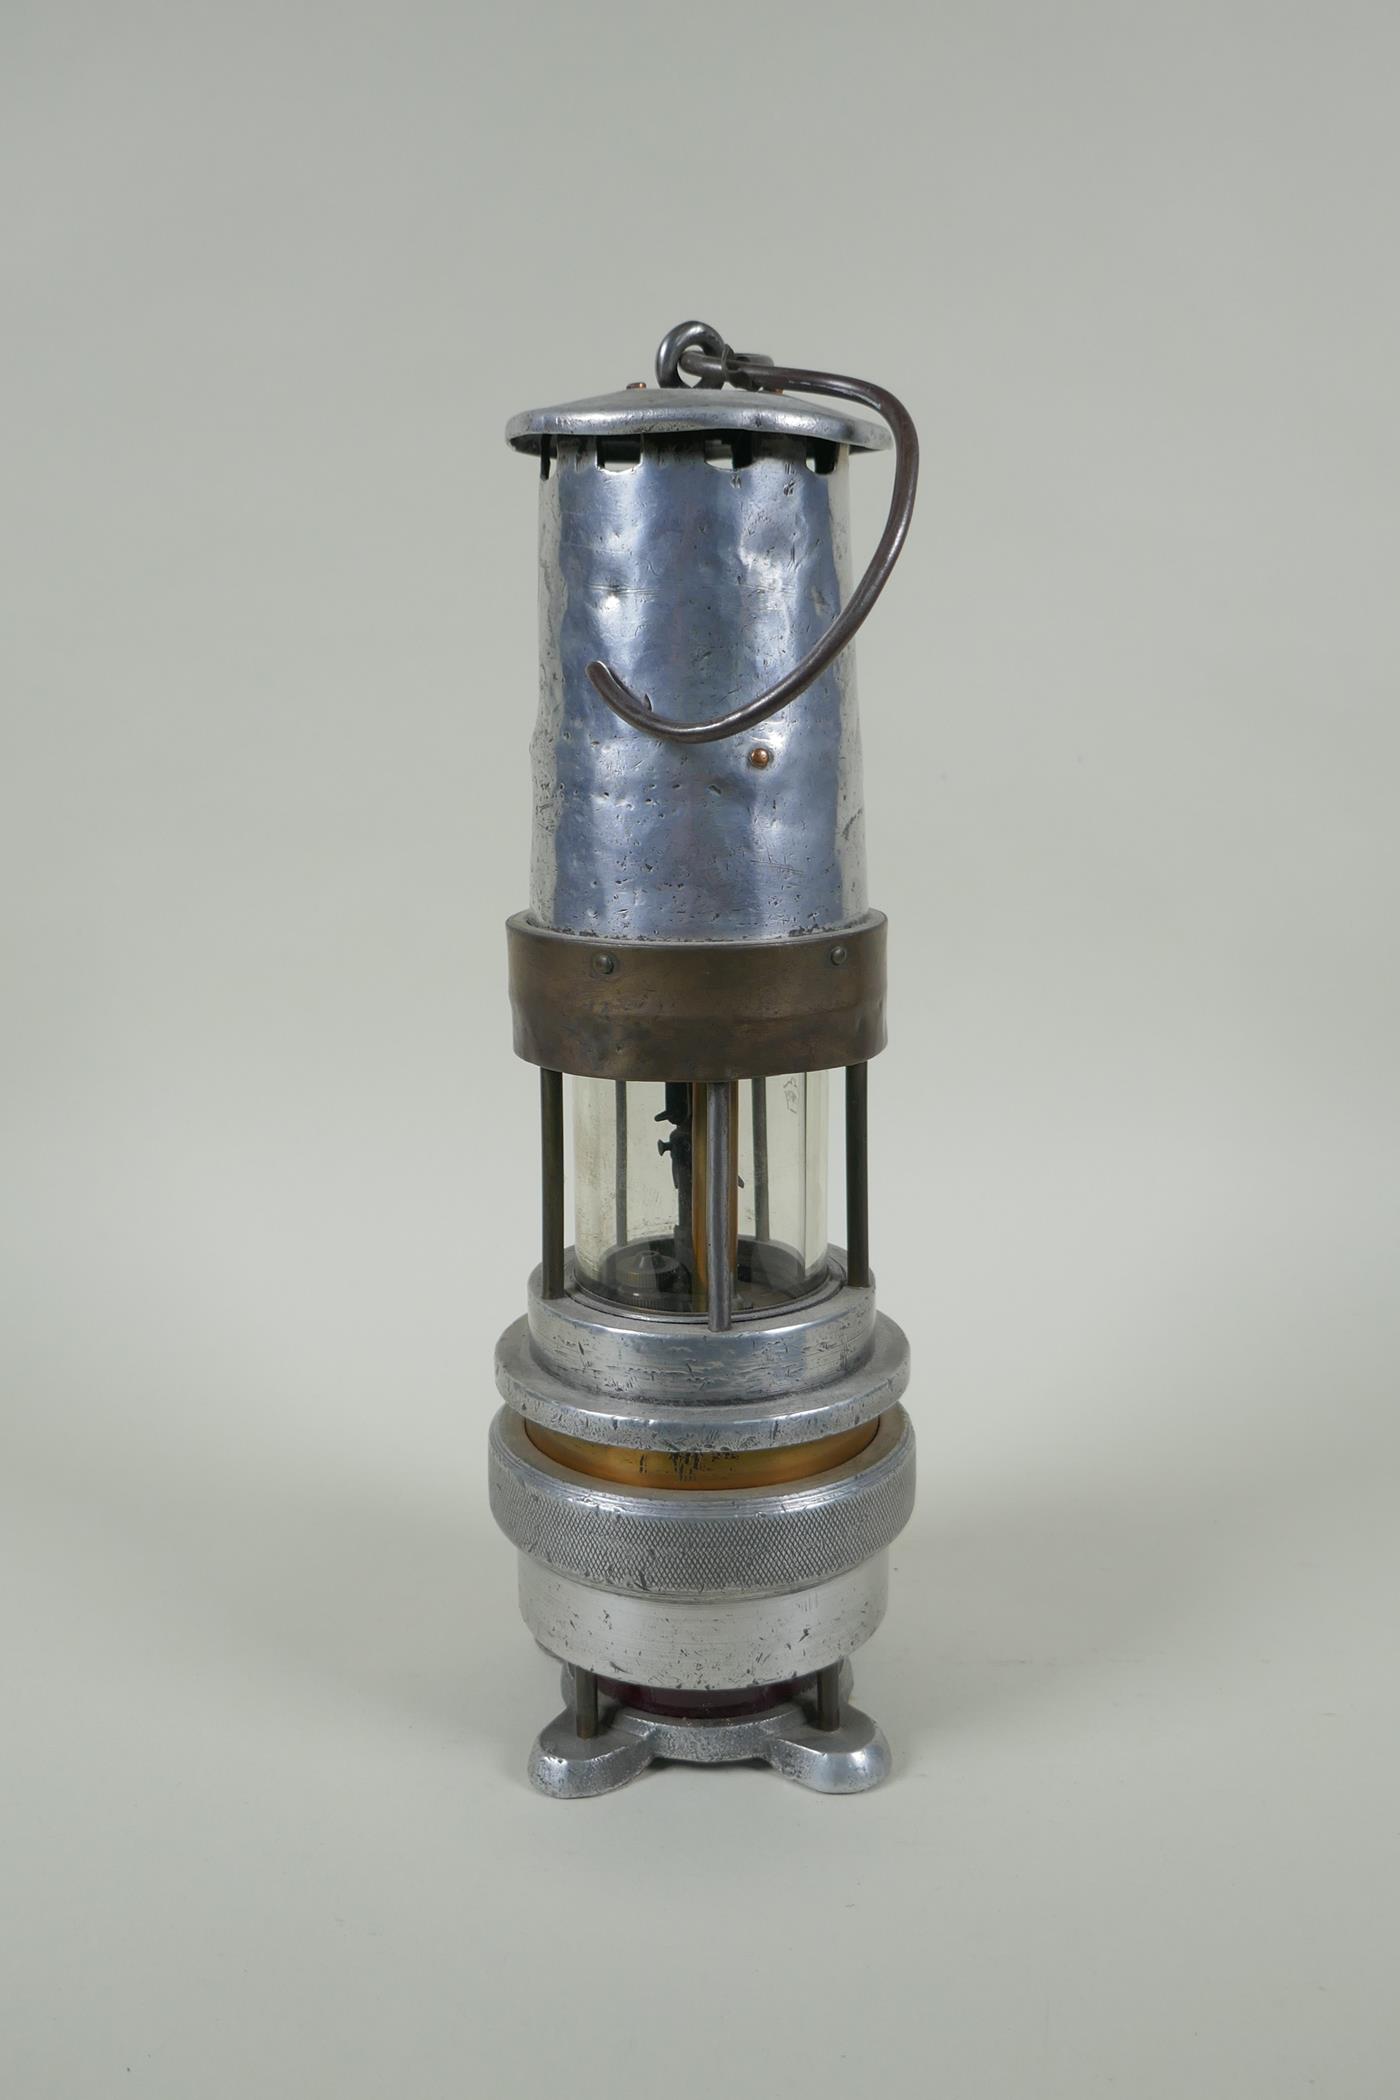 A Spiralarm Type M brass and polished metal automatic gas detector miners lamp by J. H. Naylor - Image 6 of 6